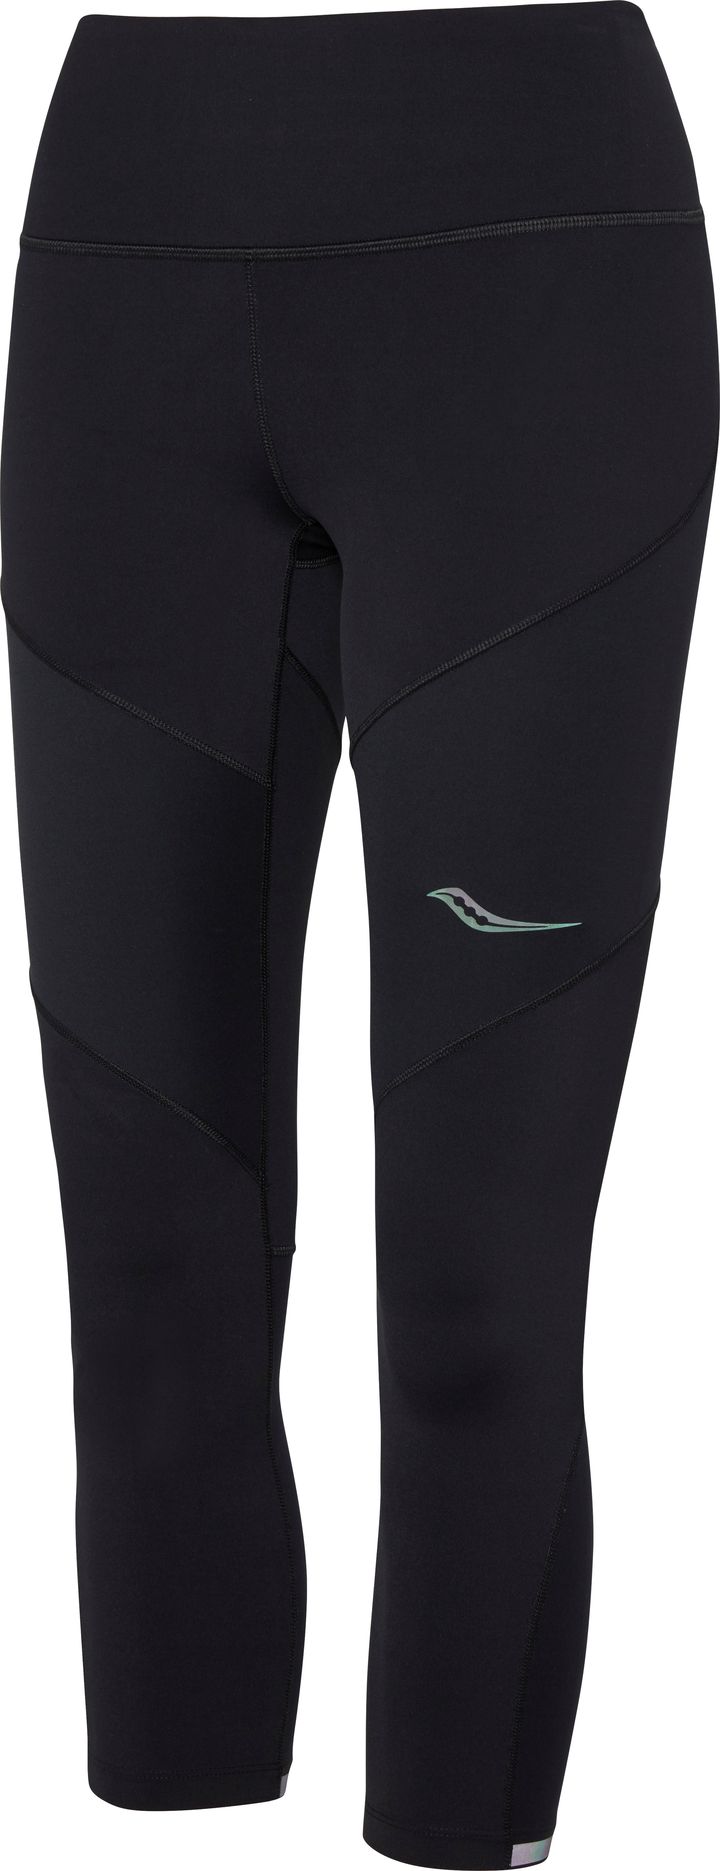 Women's Time Trial Crop Tight Black Saucony